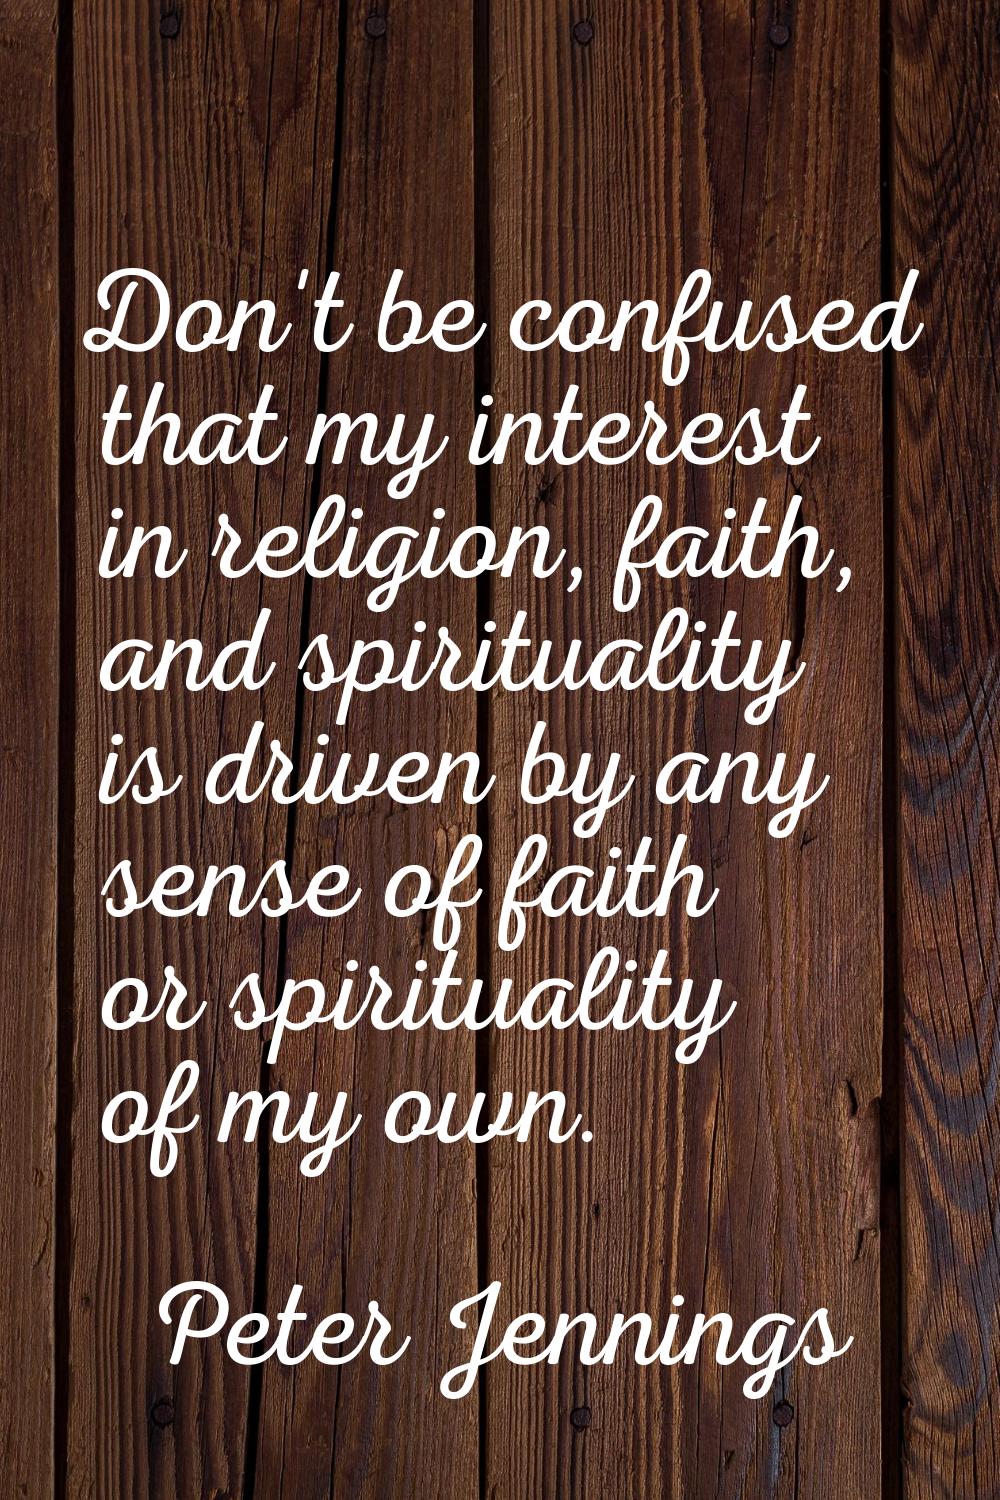 Don't be confused that my interest in religion, faith, and spirituality is driven by any sense of f